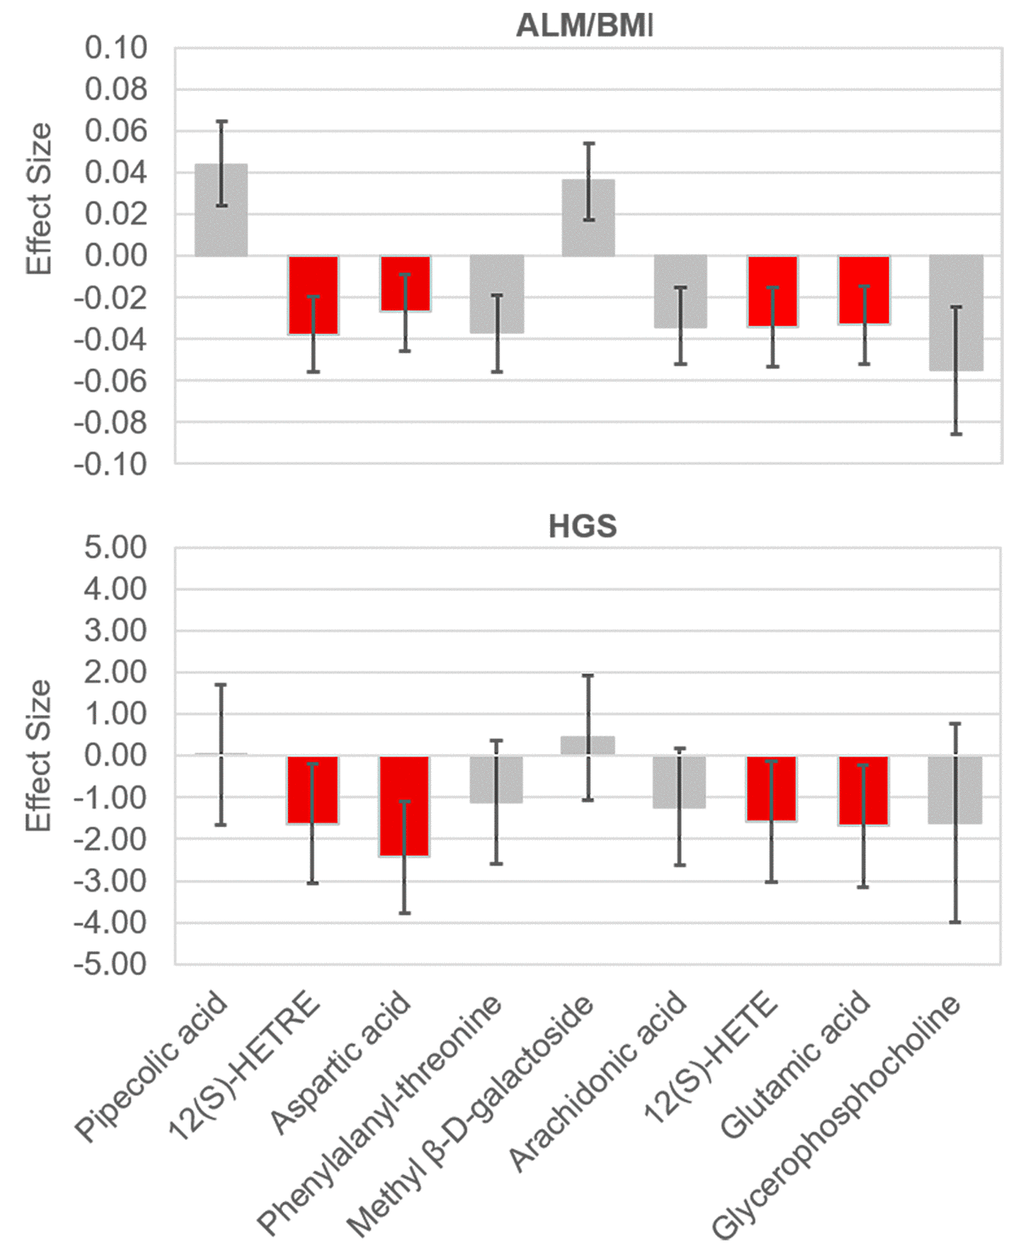 Effect sizes of the significant metabolites on ALM/BMI and HGS. The effects were associated with one standard deviation increase in the relative abundance of a metabolite. The bars show the 95% confidence internal for the effect of each metabolite. The metabolites which were significantly associated with both traits are lighted in red. ALM, appendicular lean mass; BMI, body mass index; HGS, hand grip strength.